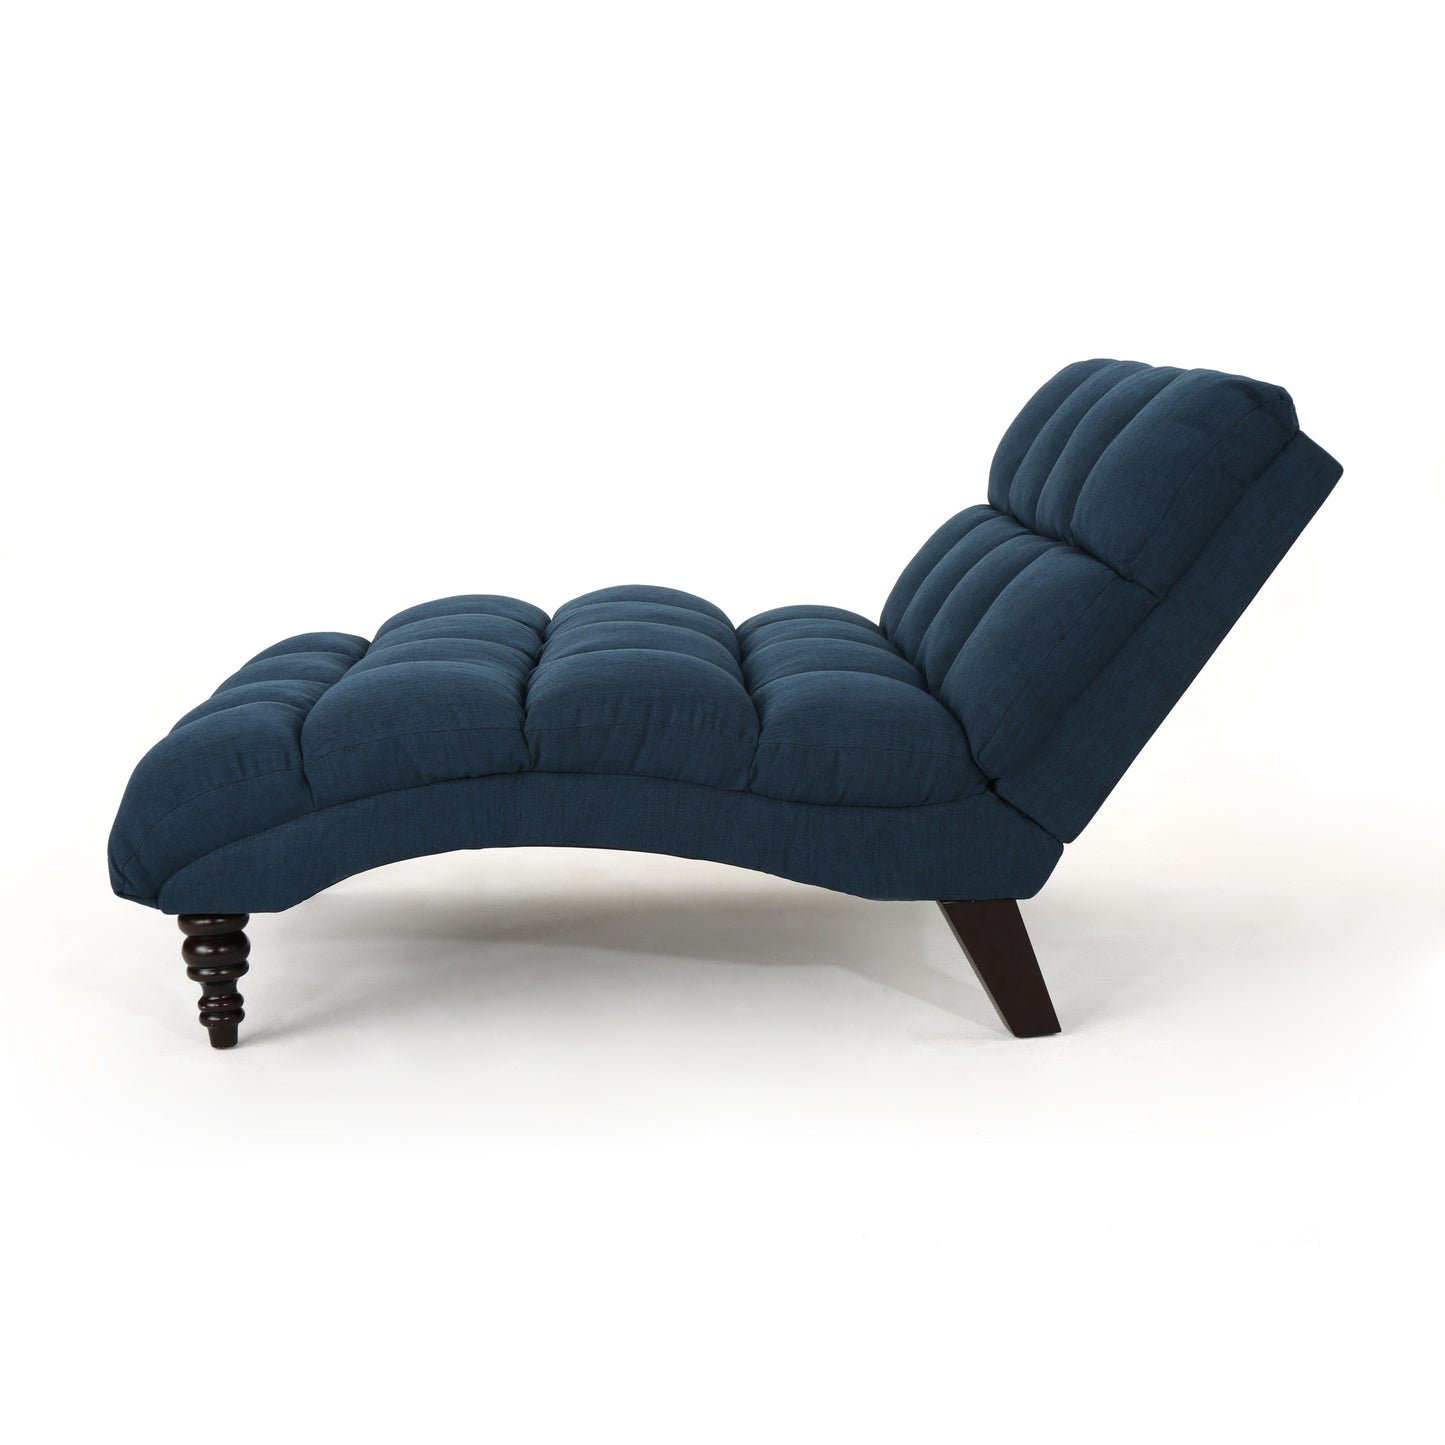 Olympia Modern Tufted Fabric Double Chaise Lounge